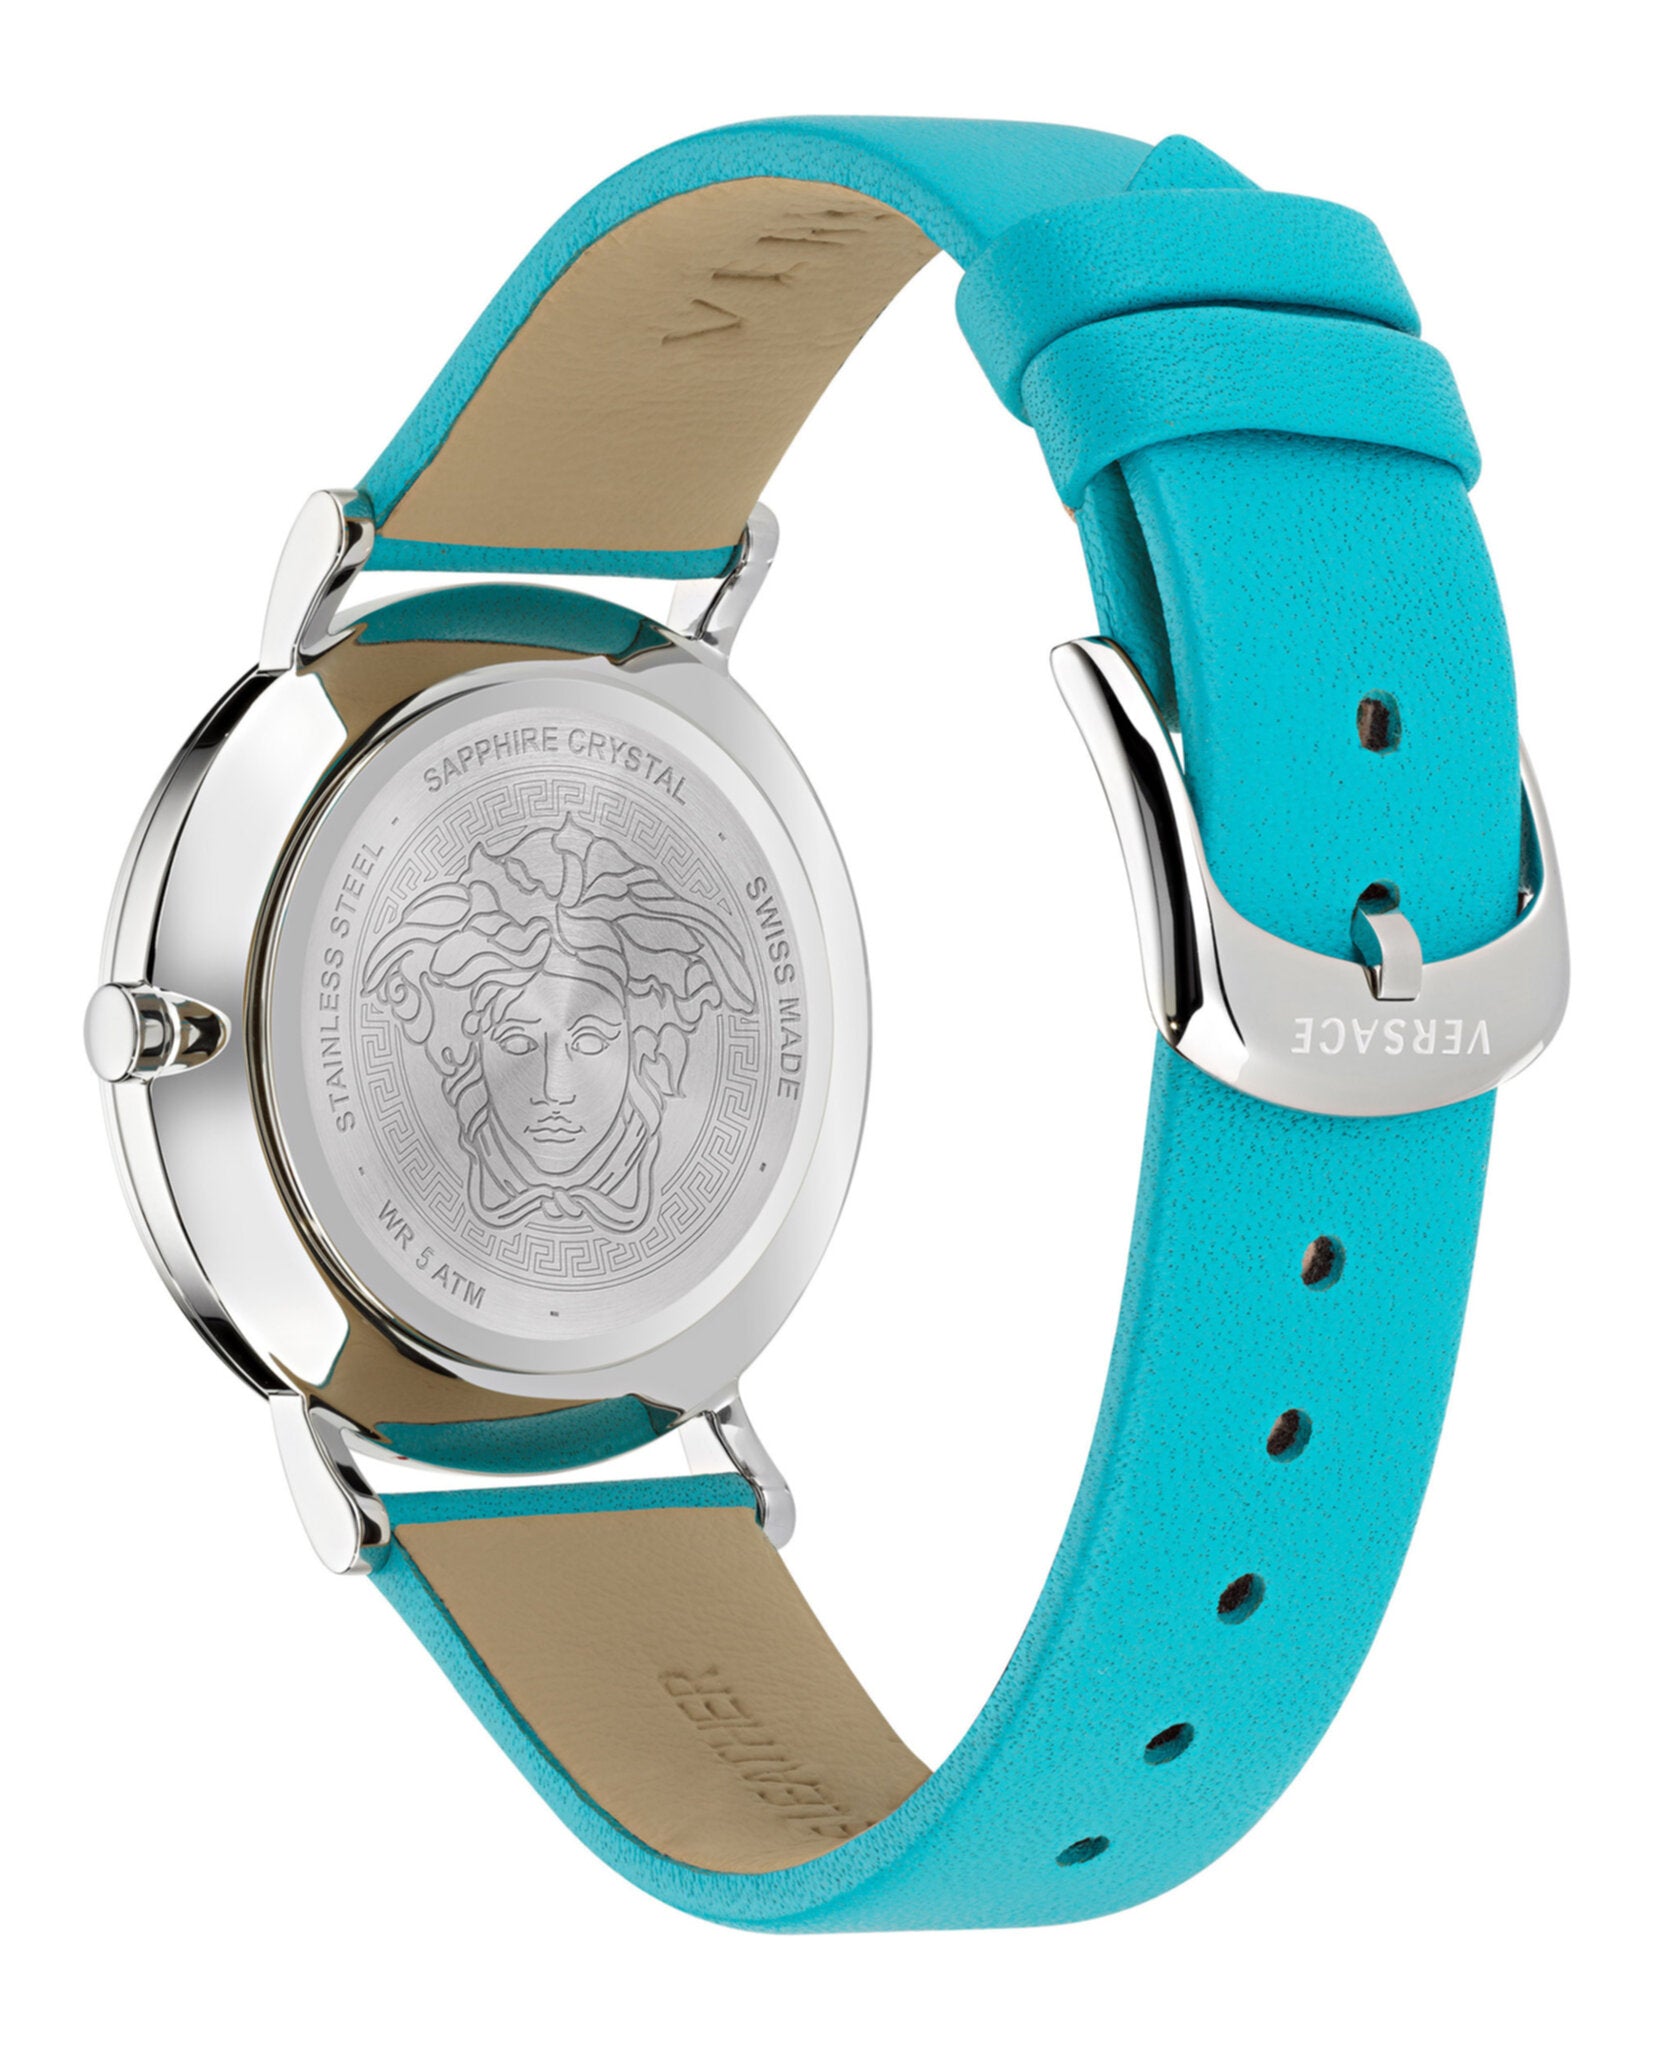 Versace New Generation Leather Watch